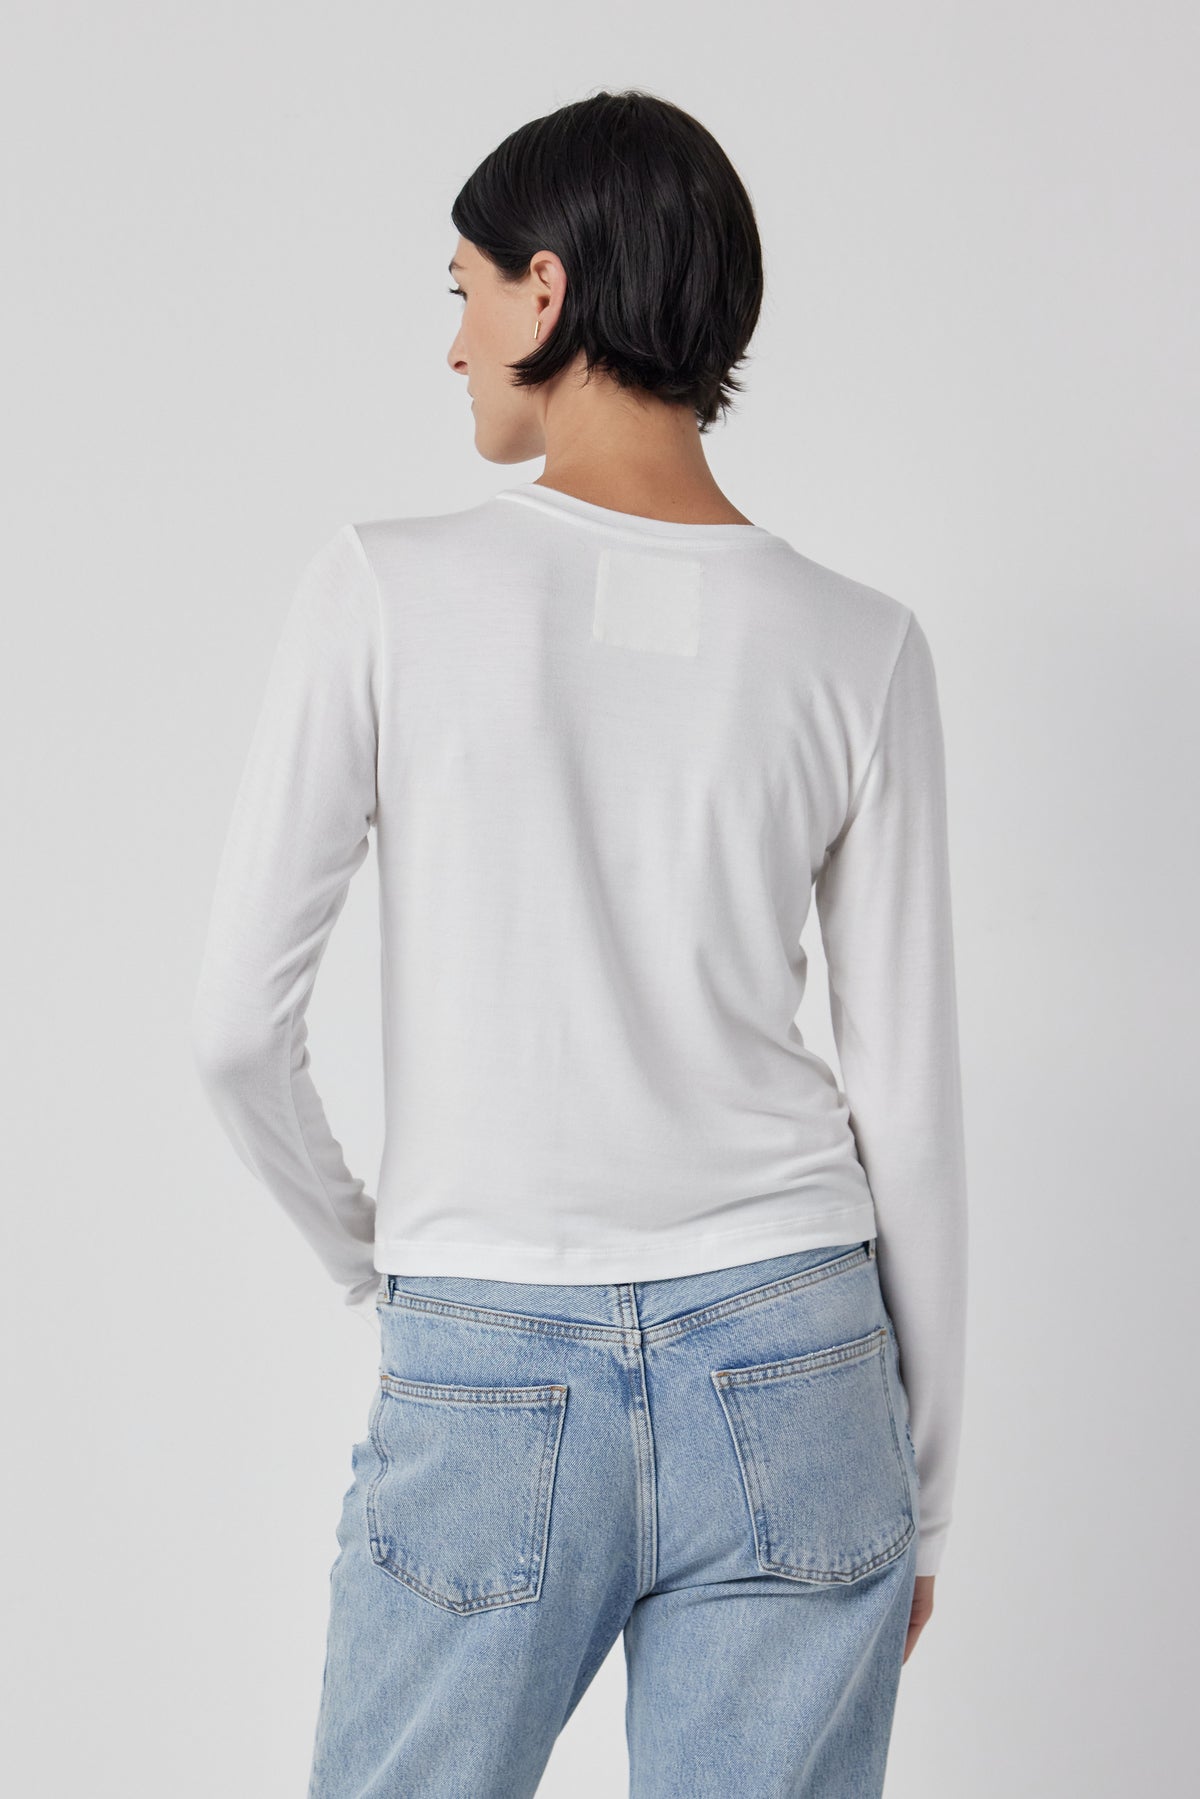 The back view of a woman wearing Velvet by Jenny Graham stretch jeans and a white long-sleeved Pacifica Tee.-35416710676673